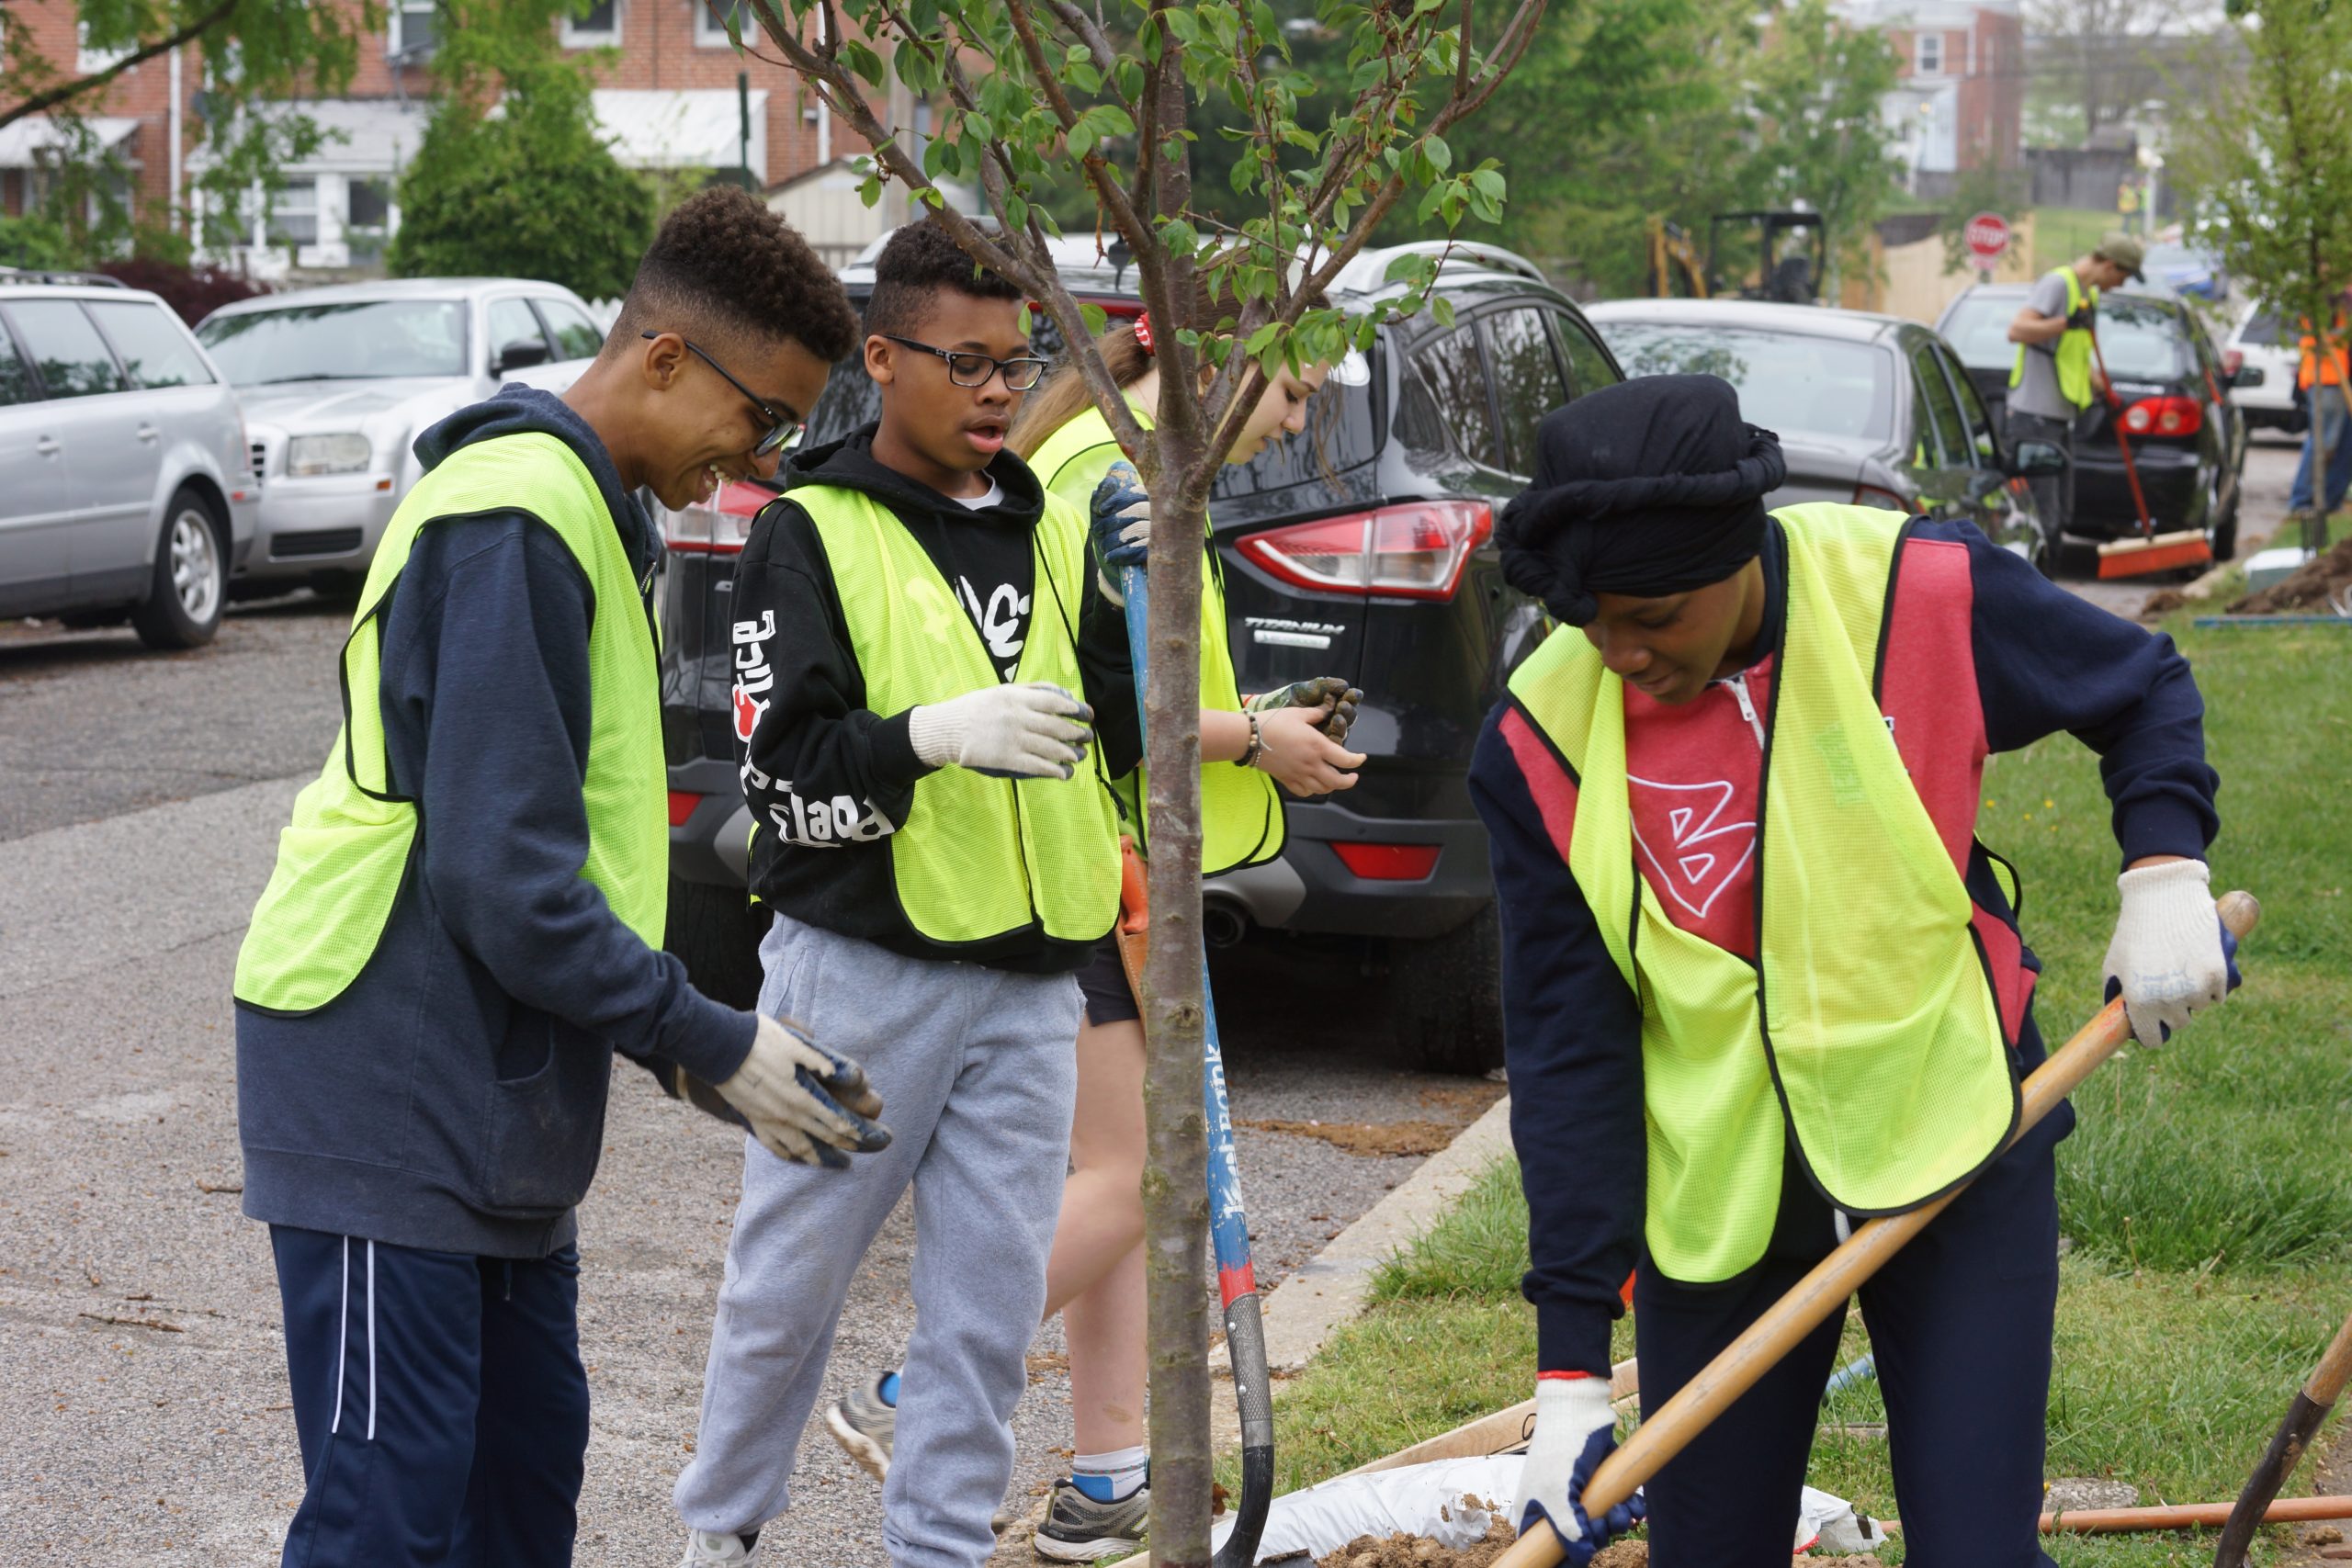 A group of students, smiling and planting a tree on a Baltimore street.